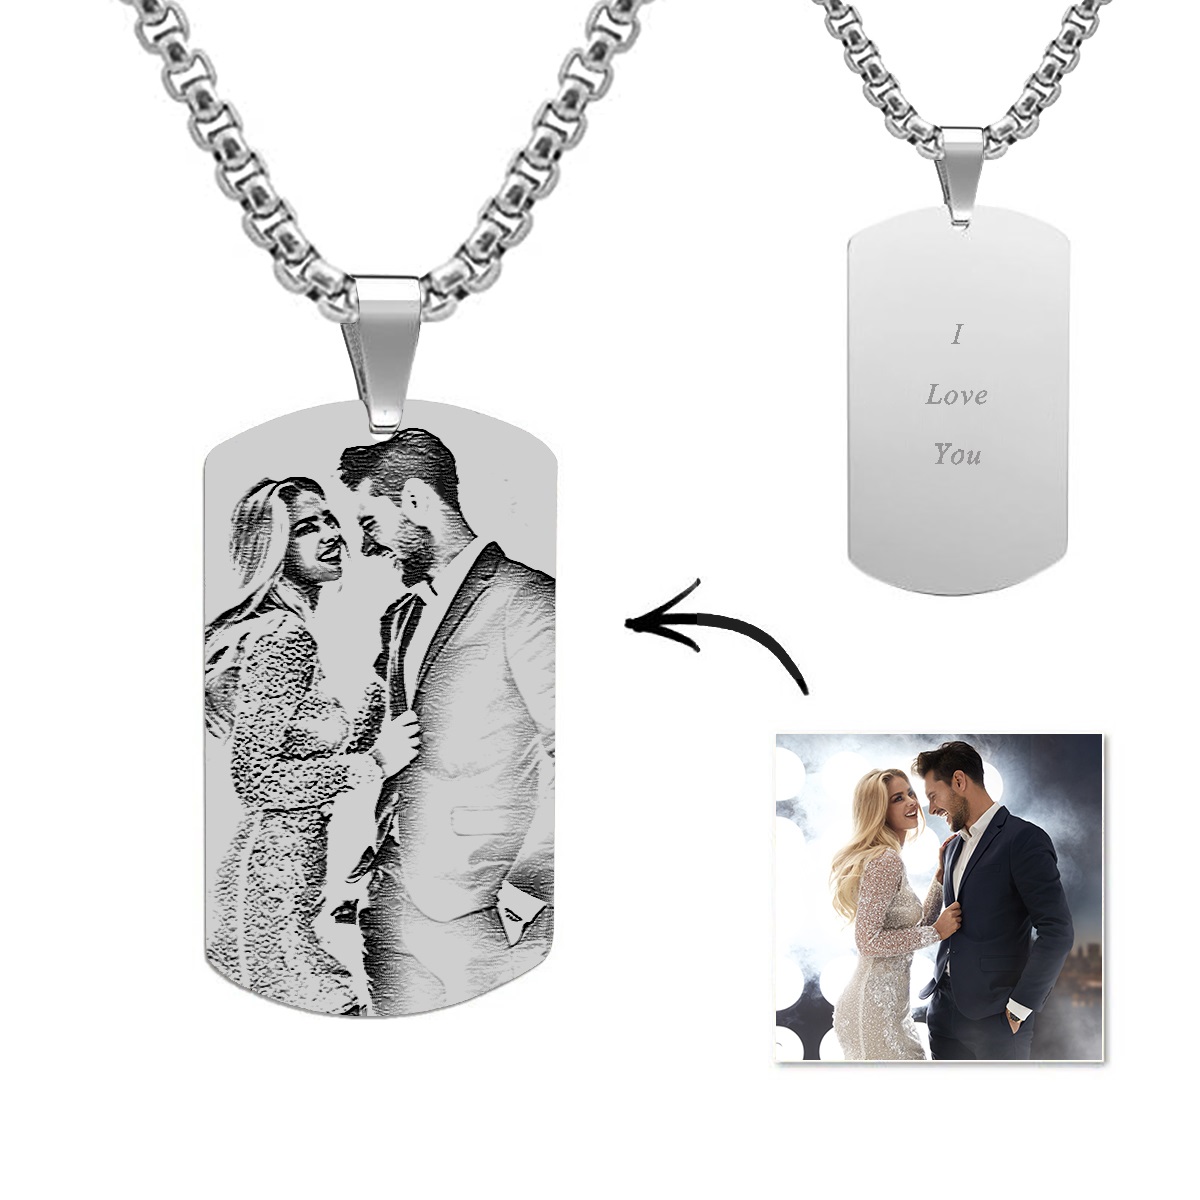 Engraved Black Titanium Steel Photo Tag Necklace (Silver BacK)